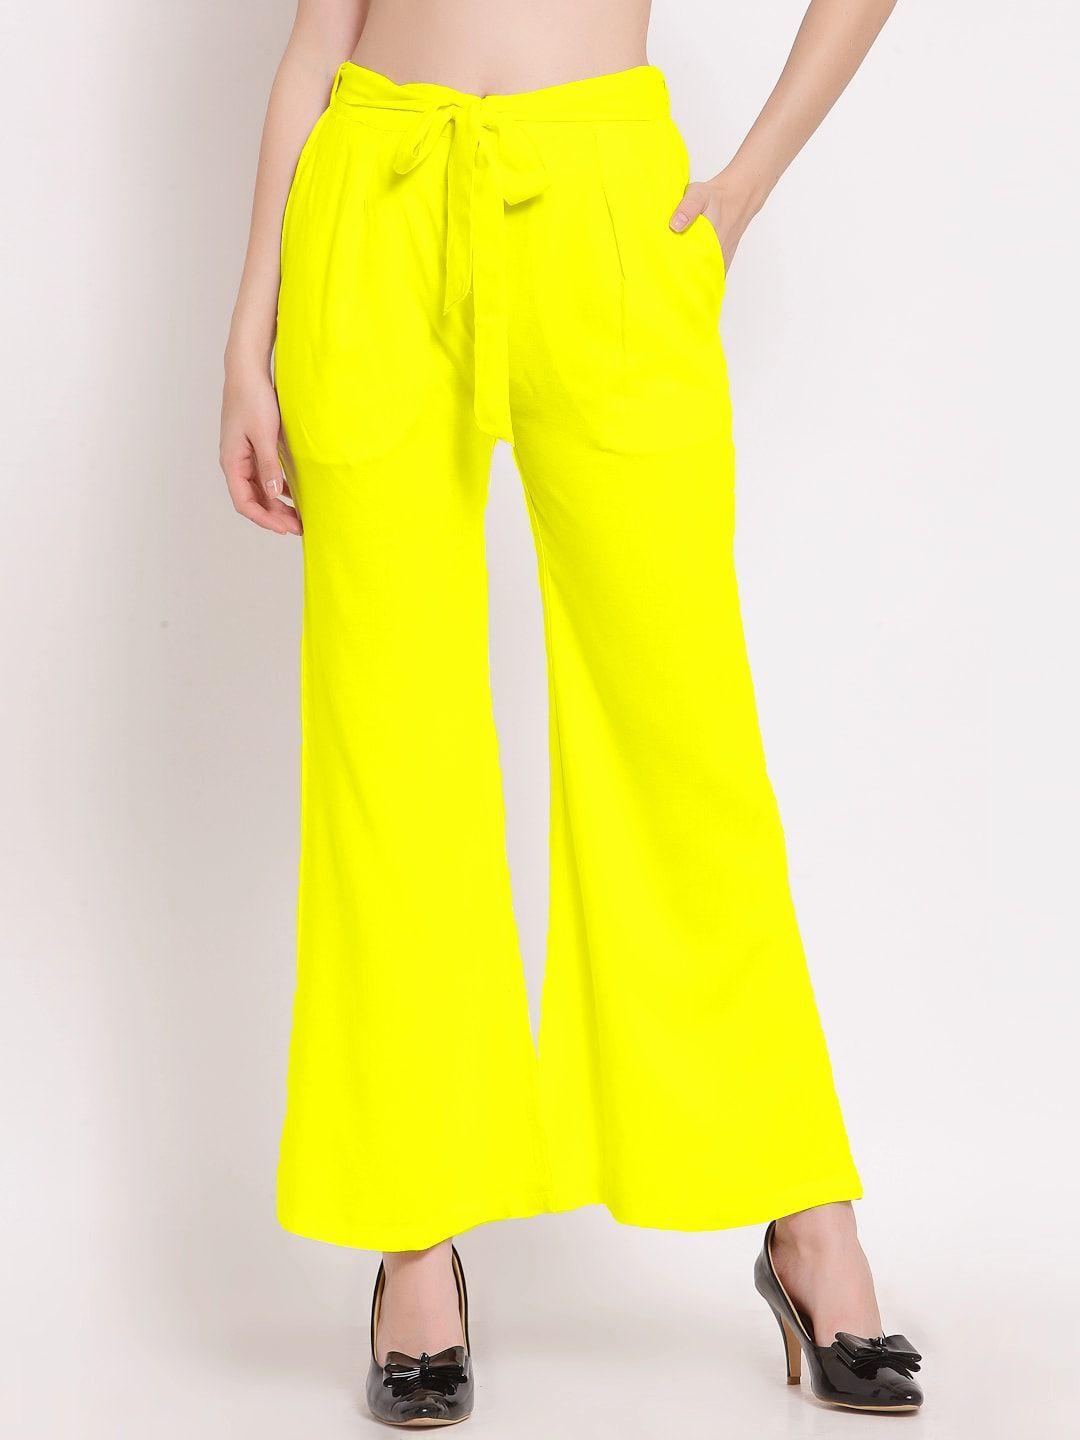 patrorna women smart tapered fit culottes trousers